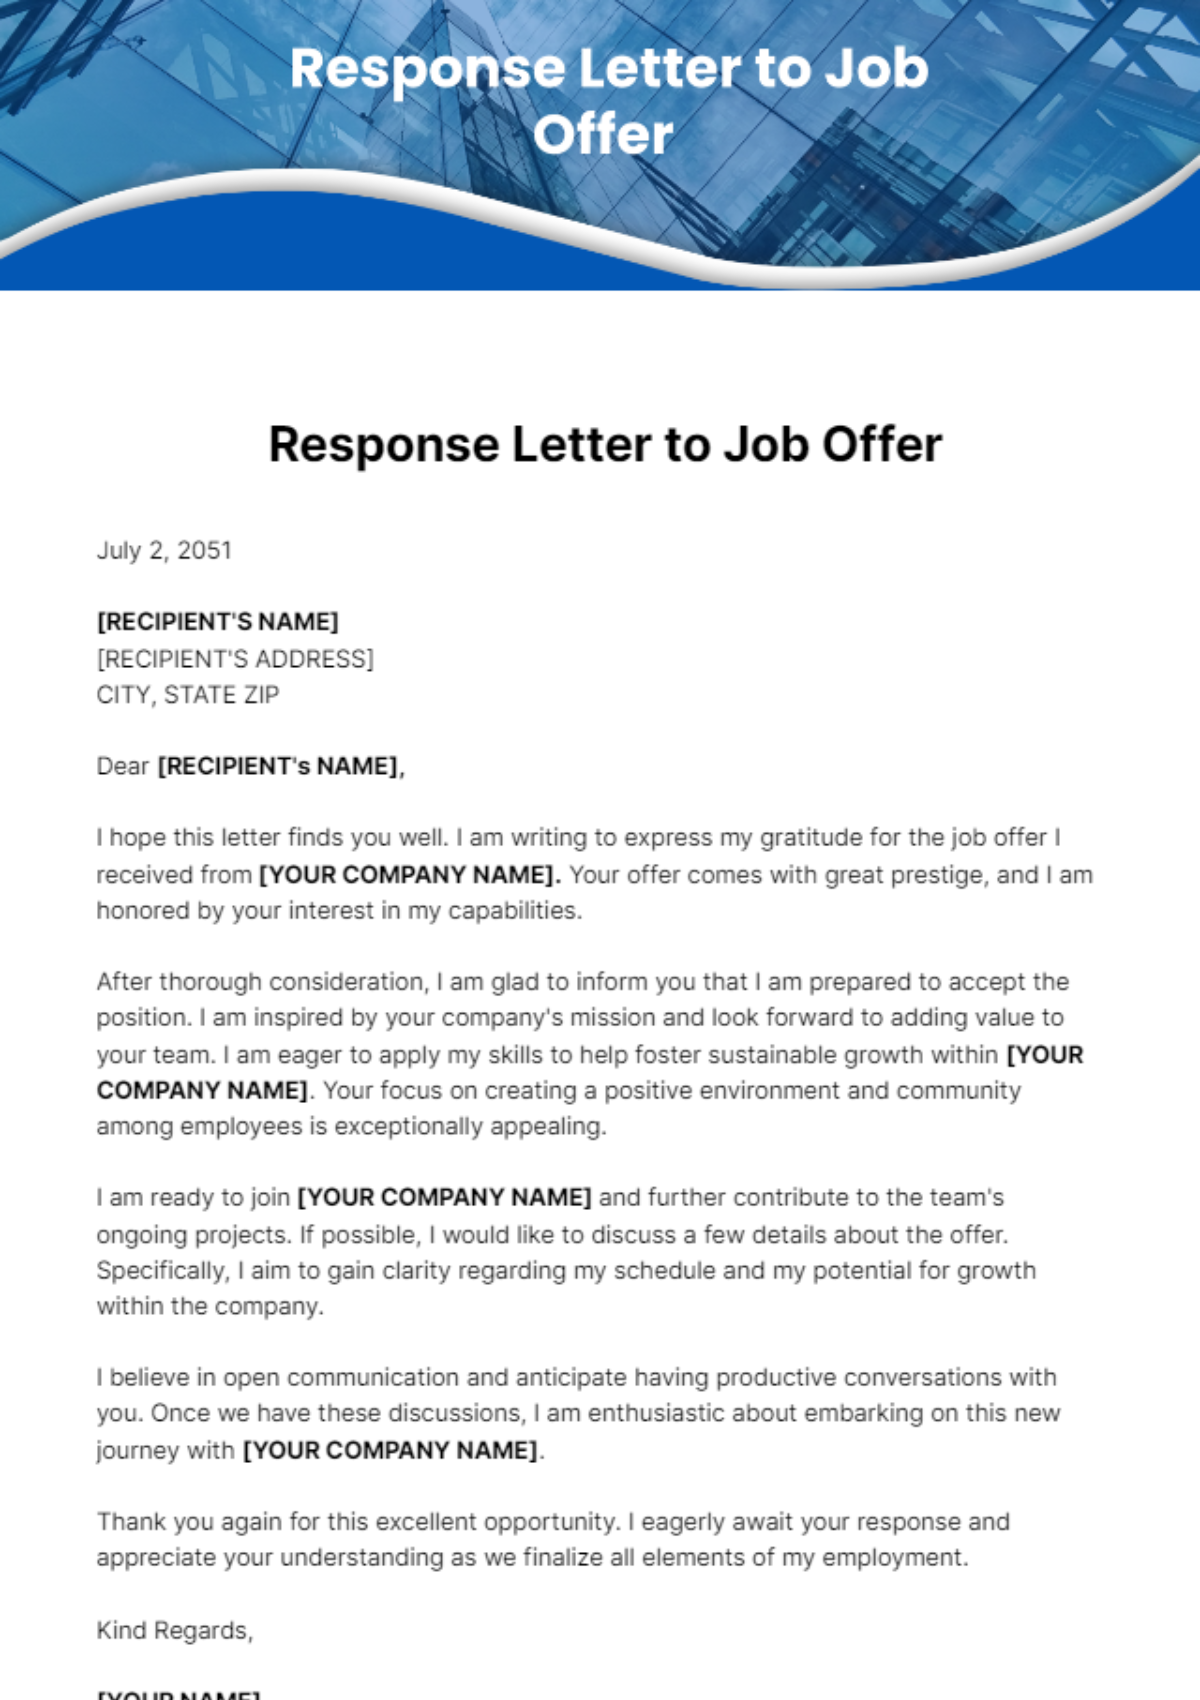 Response Letter to Job Offer Template